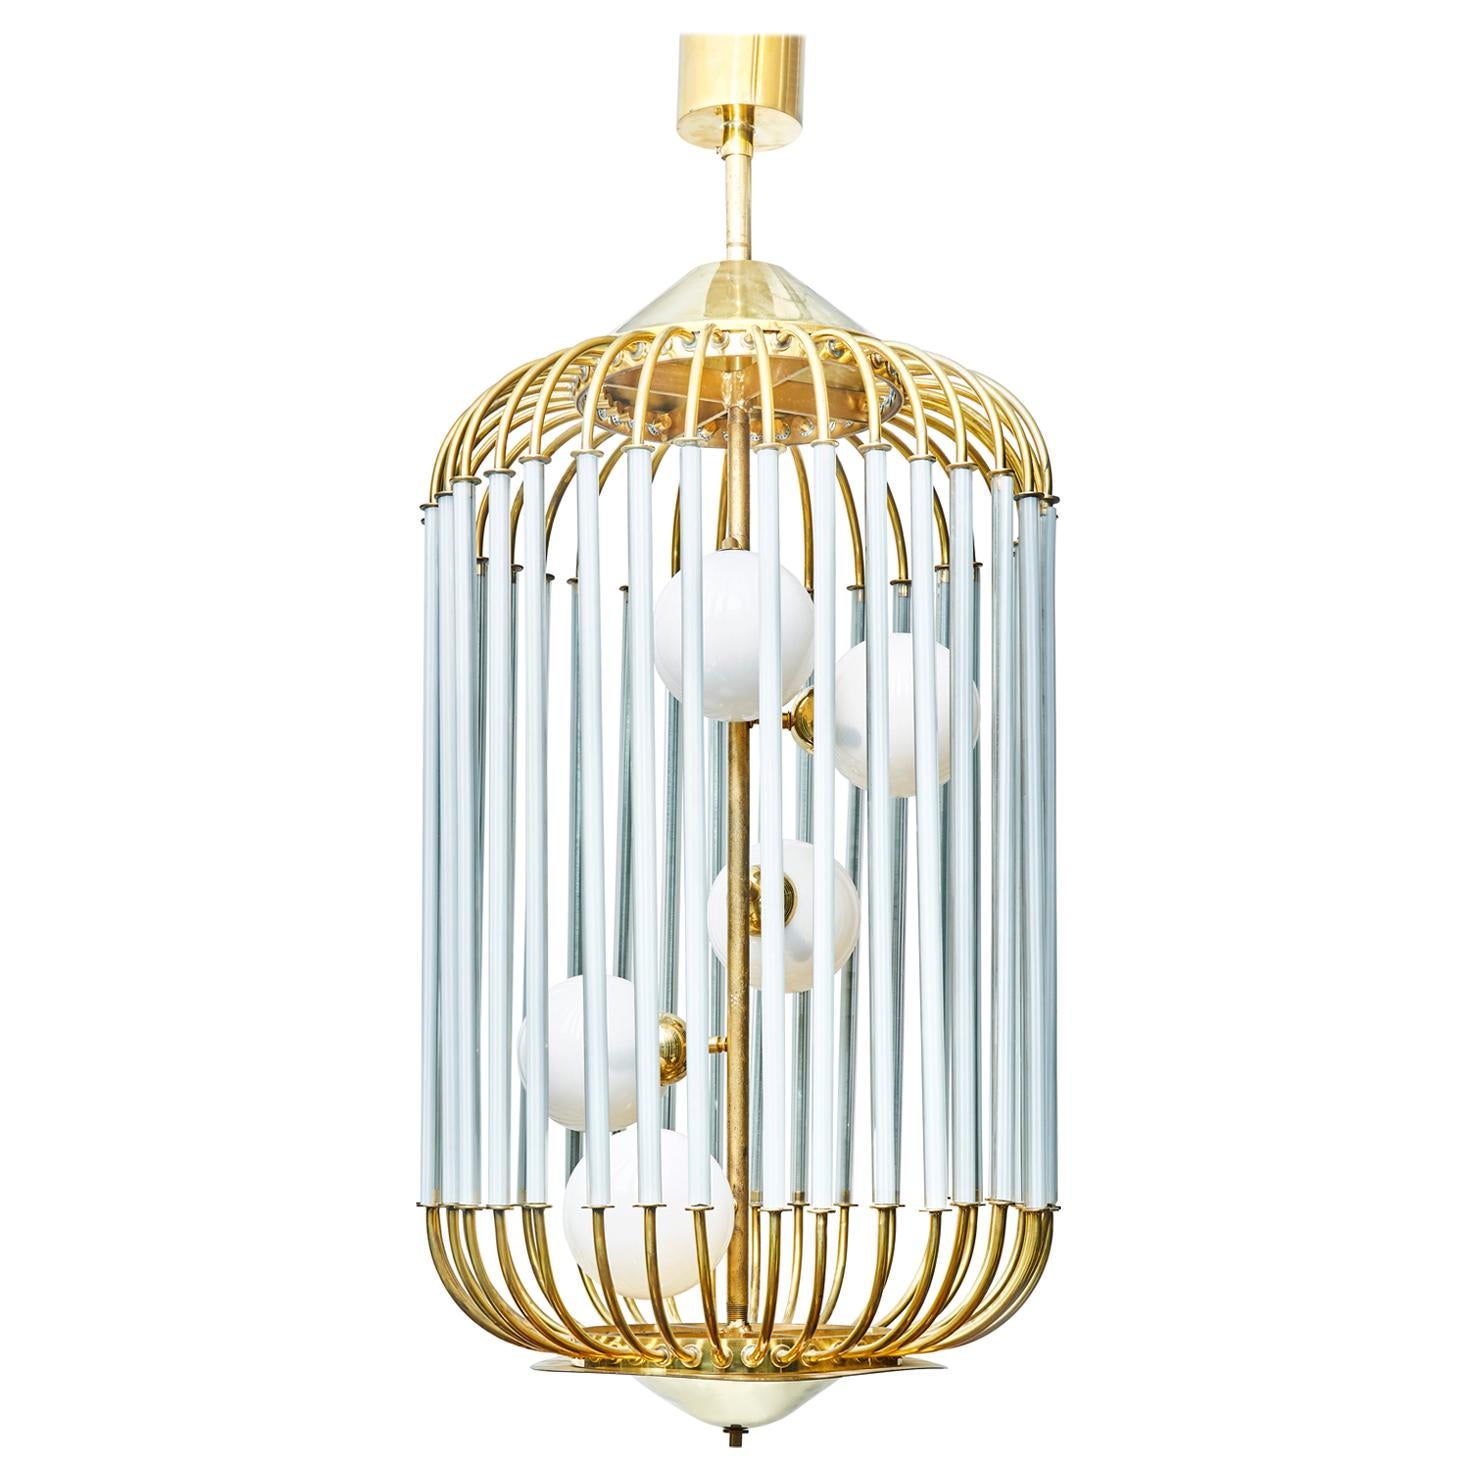 Bird Cage Shaped Vintage Chandelier with Glass Globes